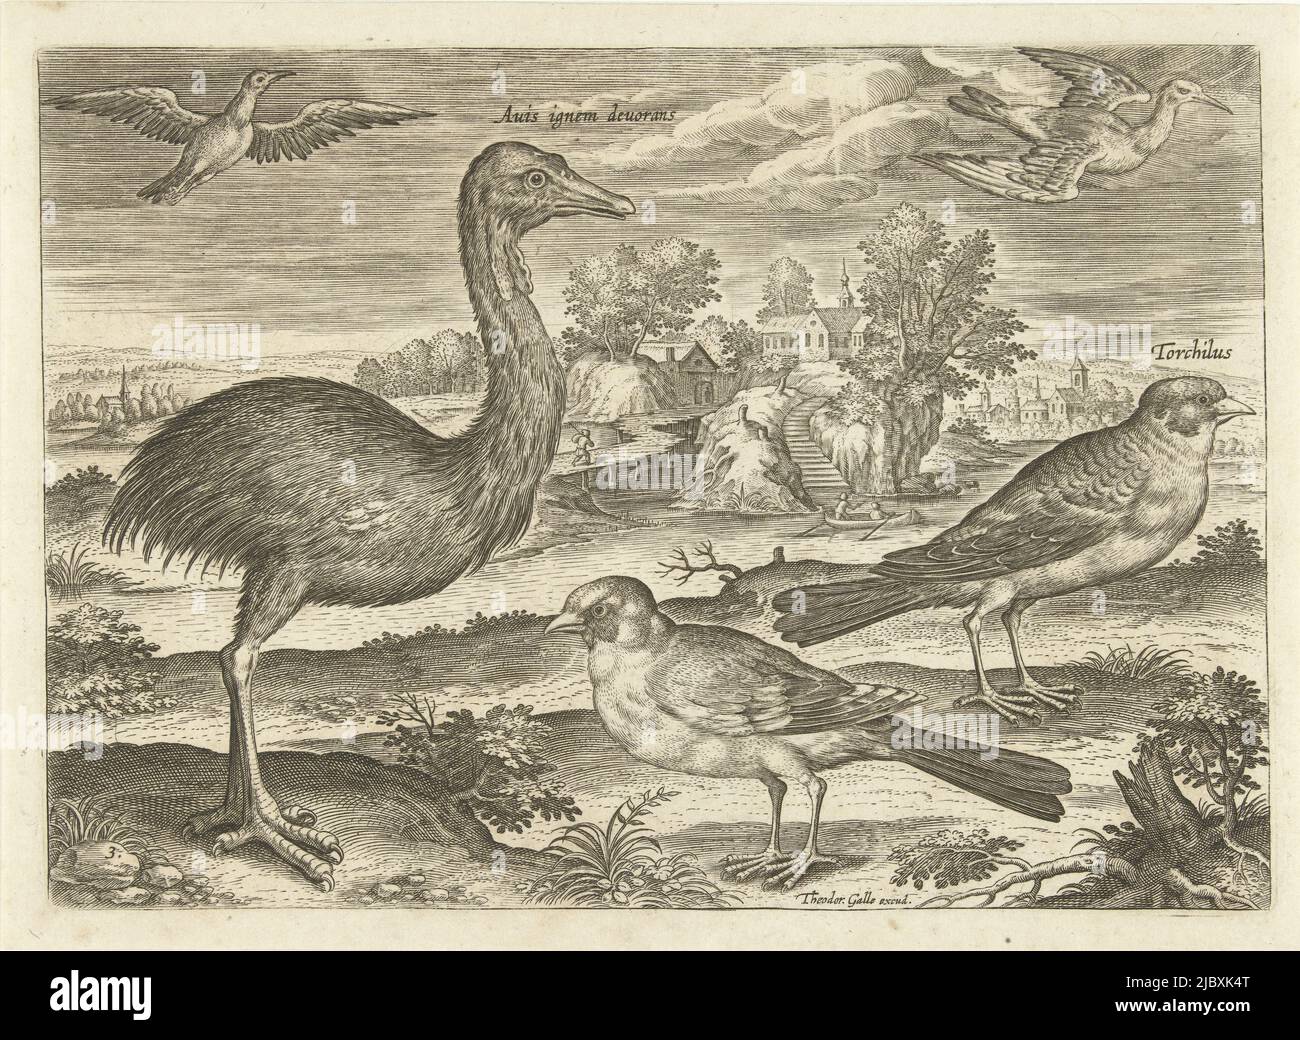 A nandu, several finches and two other birds in a landscape with a pond. The print is part of a series with birds, Single birds in a landscape Birds (series title) Avivm vivae (series title), print maker: Adriaen Collaert, (mentioned on object), Adriaen Collaert, publisher: Theodoor Galle, (mentioned on object), Antwerp, 1598 - 1618, paper, engraving, h 136 mm × w 191 mm Stock Photo